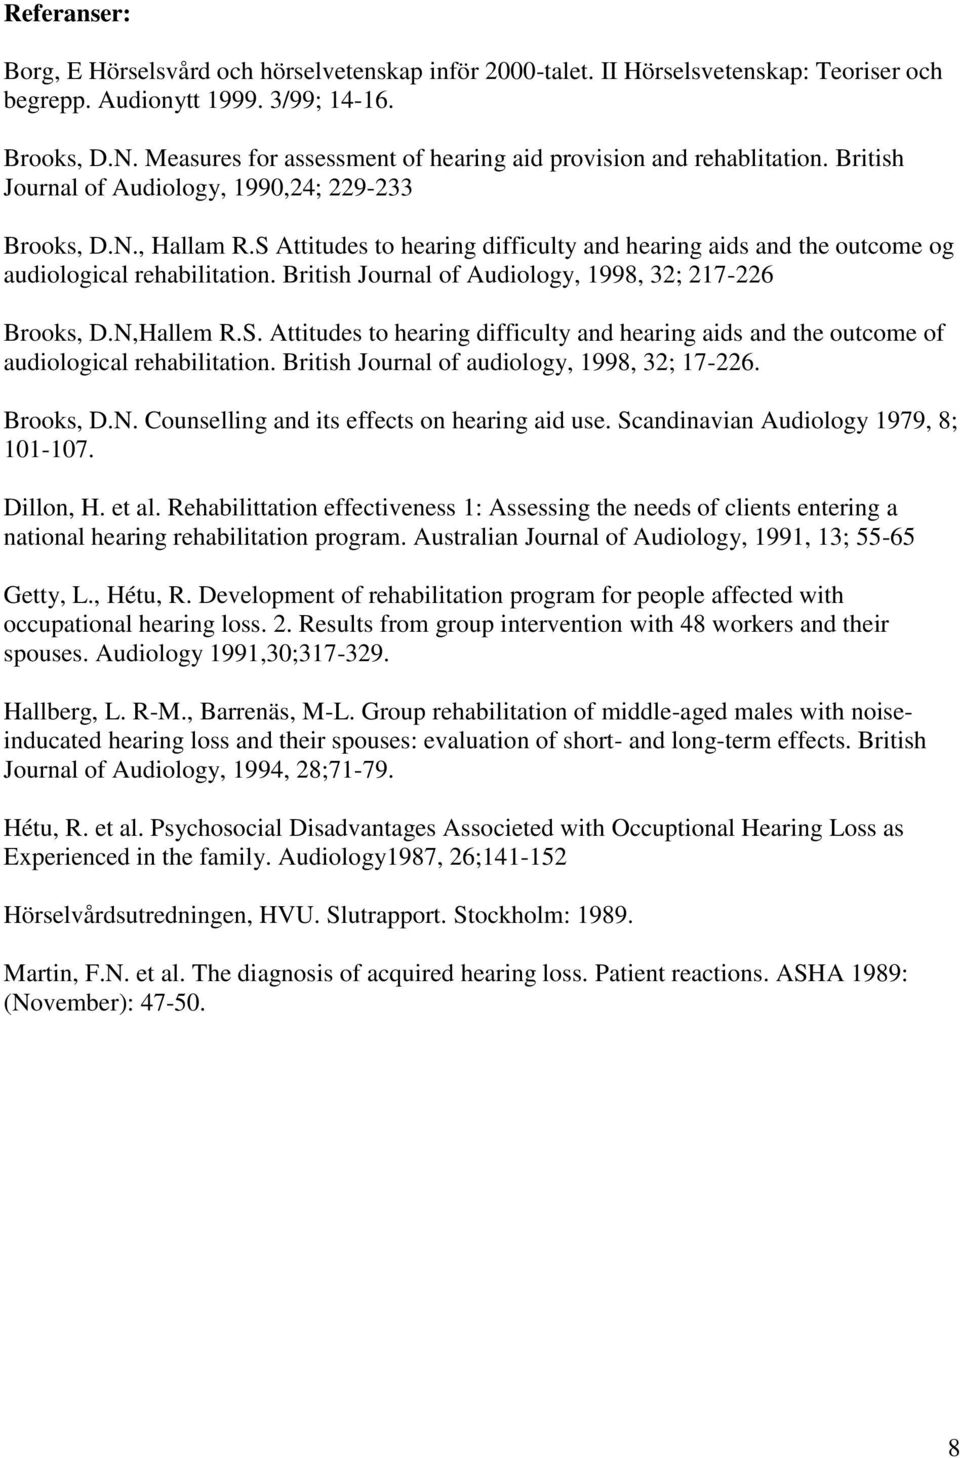 S Attitudes to hearing difficulty and hearing aids and the outcome og audiological rehabilitation. British Journal of Audiology, 1998, 32; 217-226 Brooks, D.N,Hallem R.S. Attitudes to hearing difficulty and hearing aids and the outcome of audiological rehabilitation.